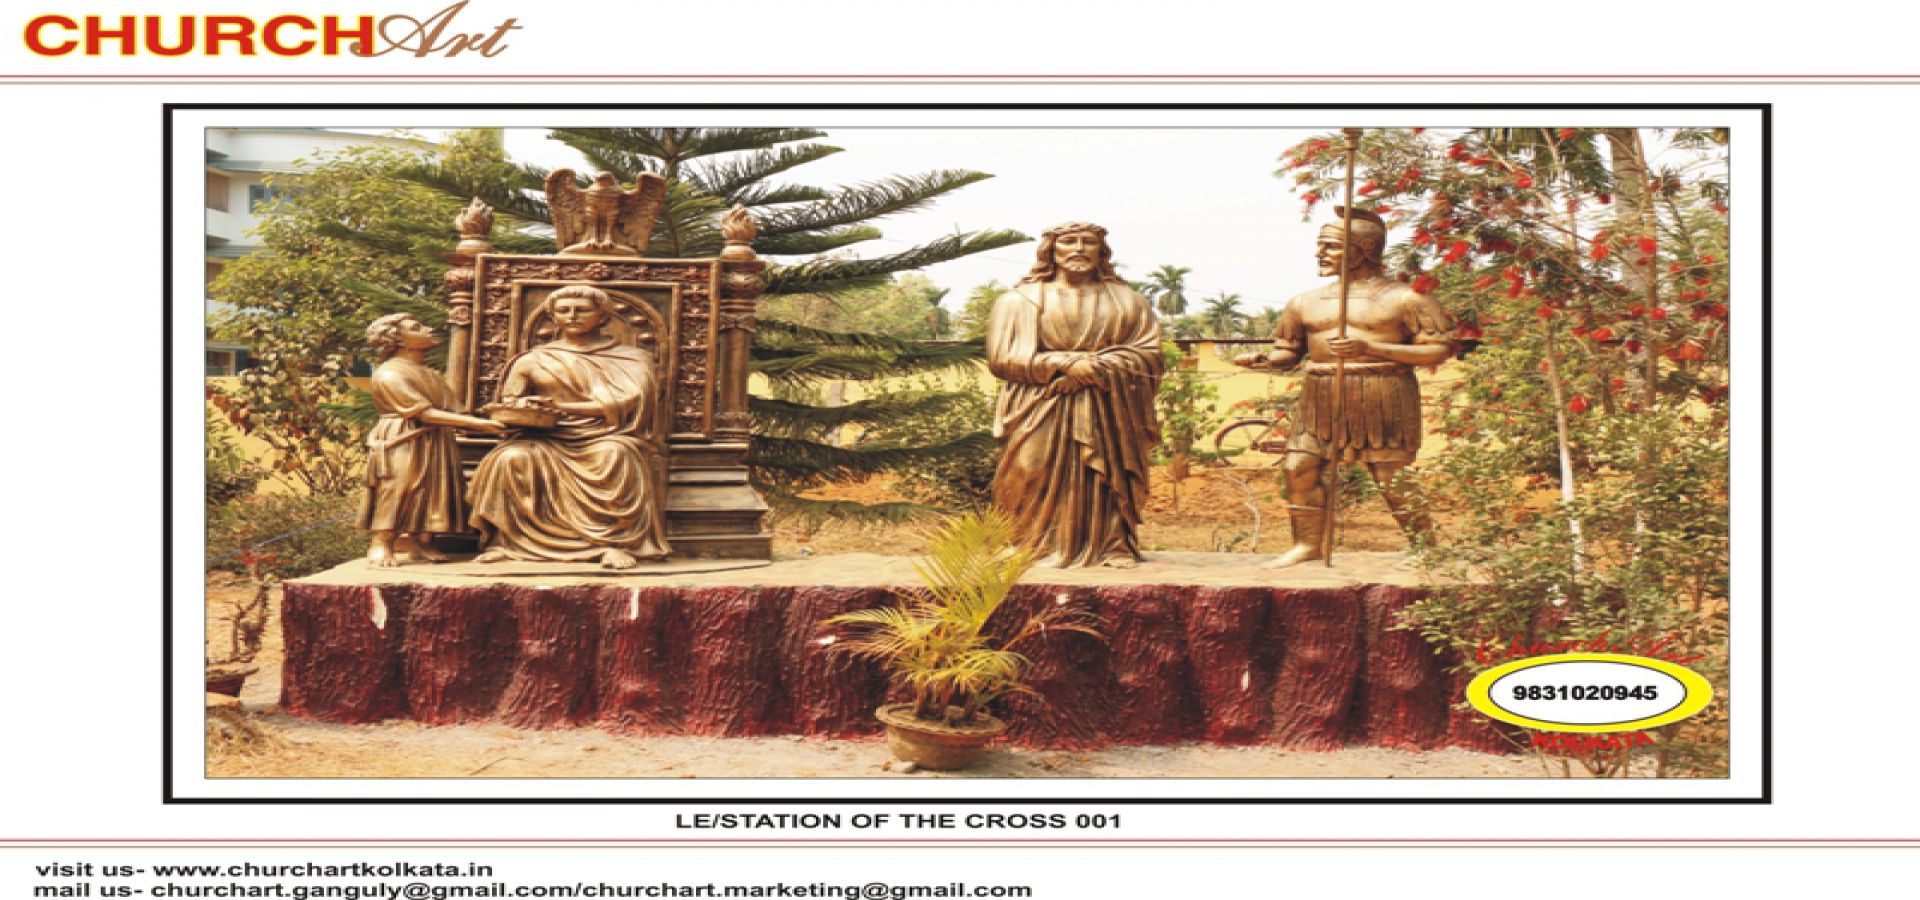 Station Of The Cross